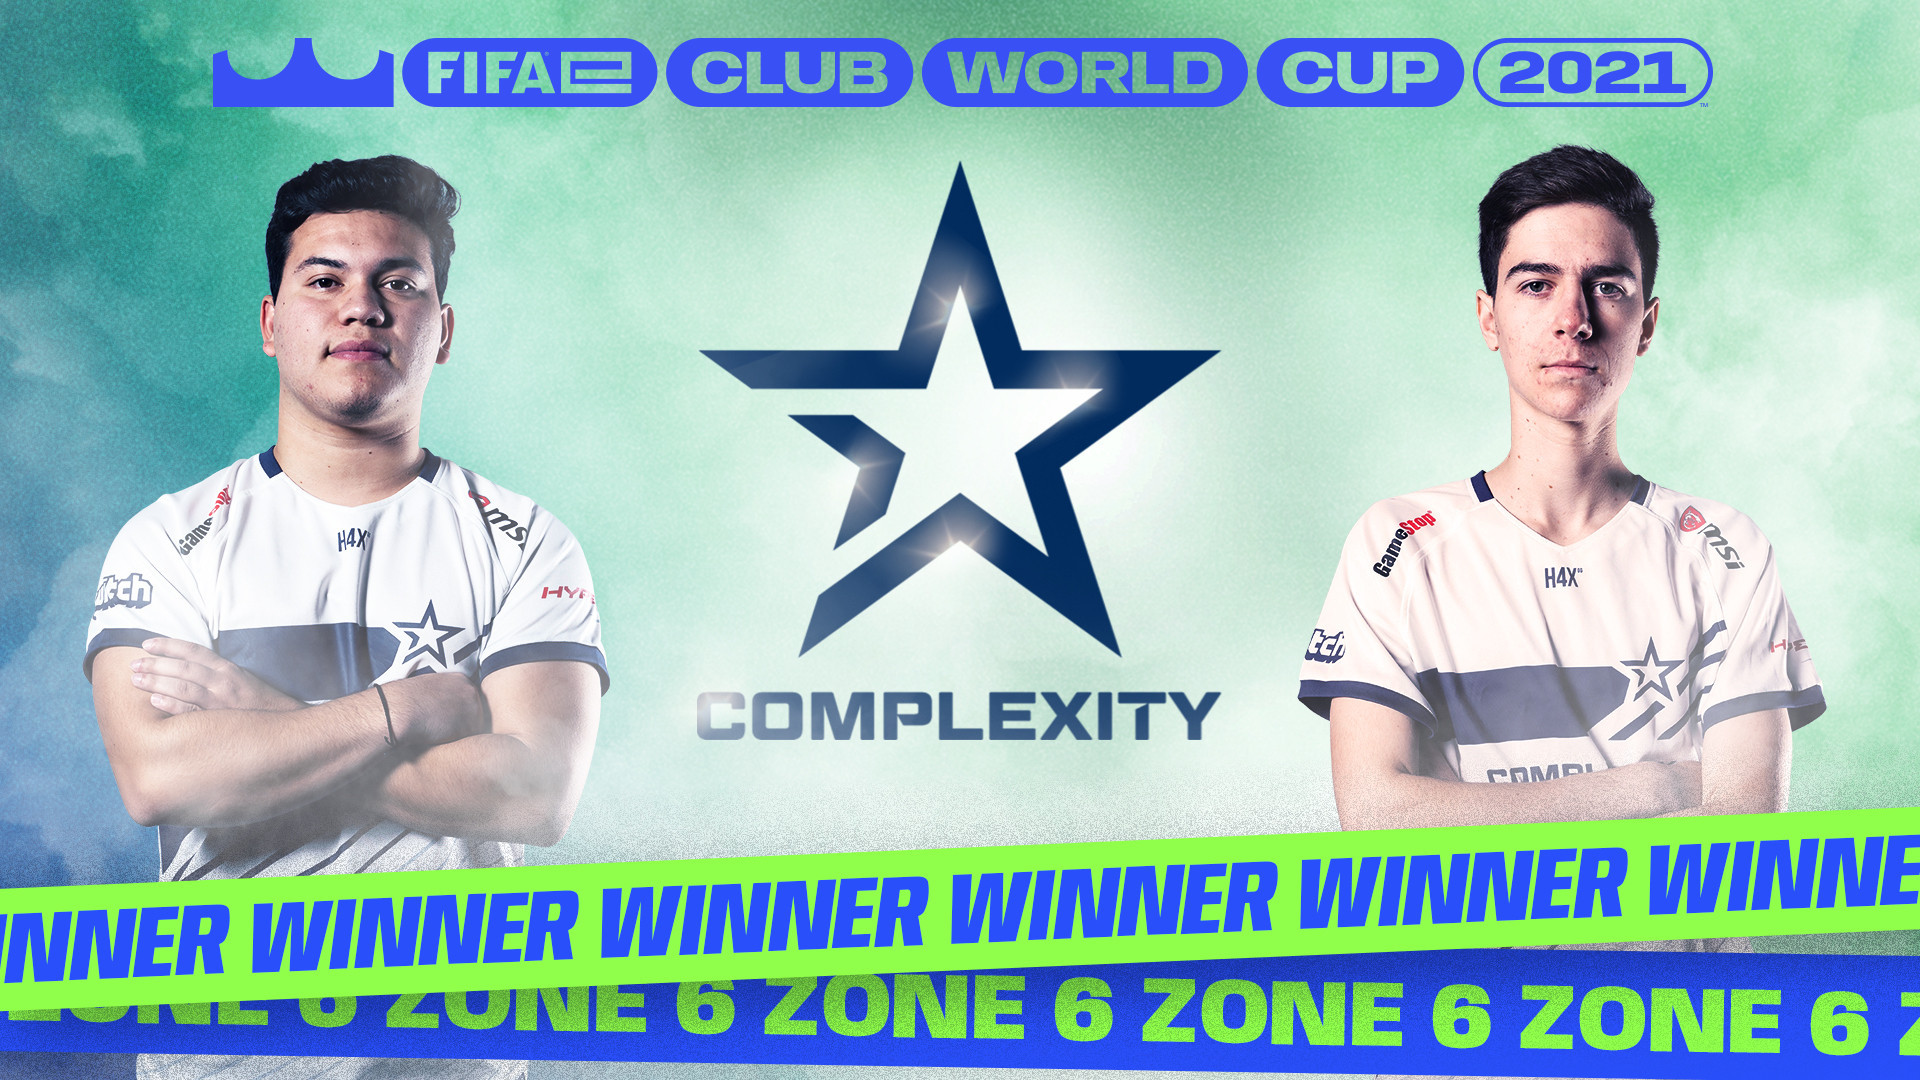 Complexity Gaming were among the winners on the final day of the FIFAe Club World Cup, triumphing in zone six, for teams from North America ©FIFA